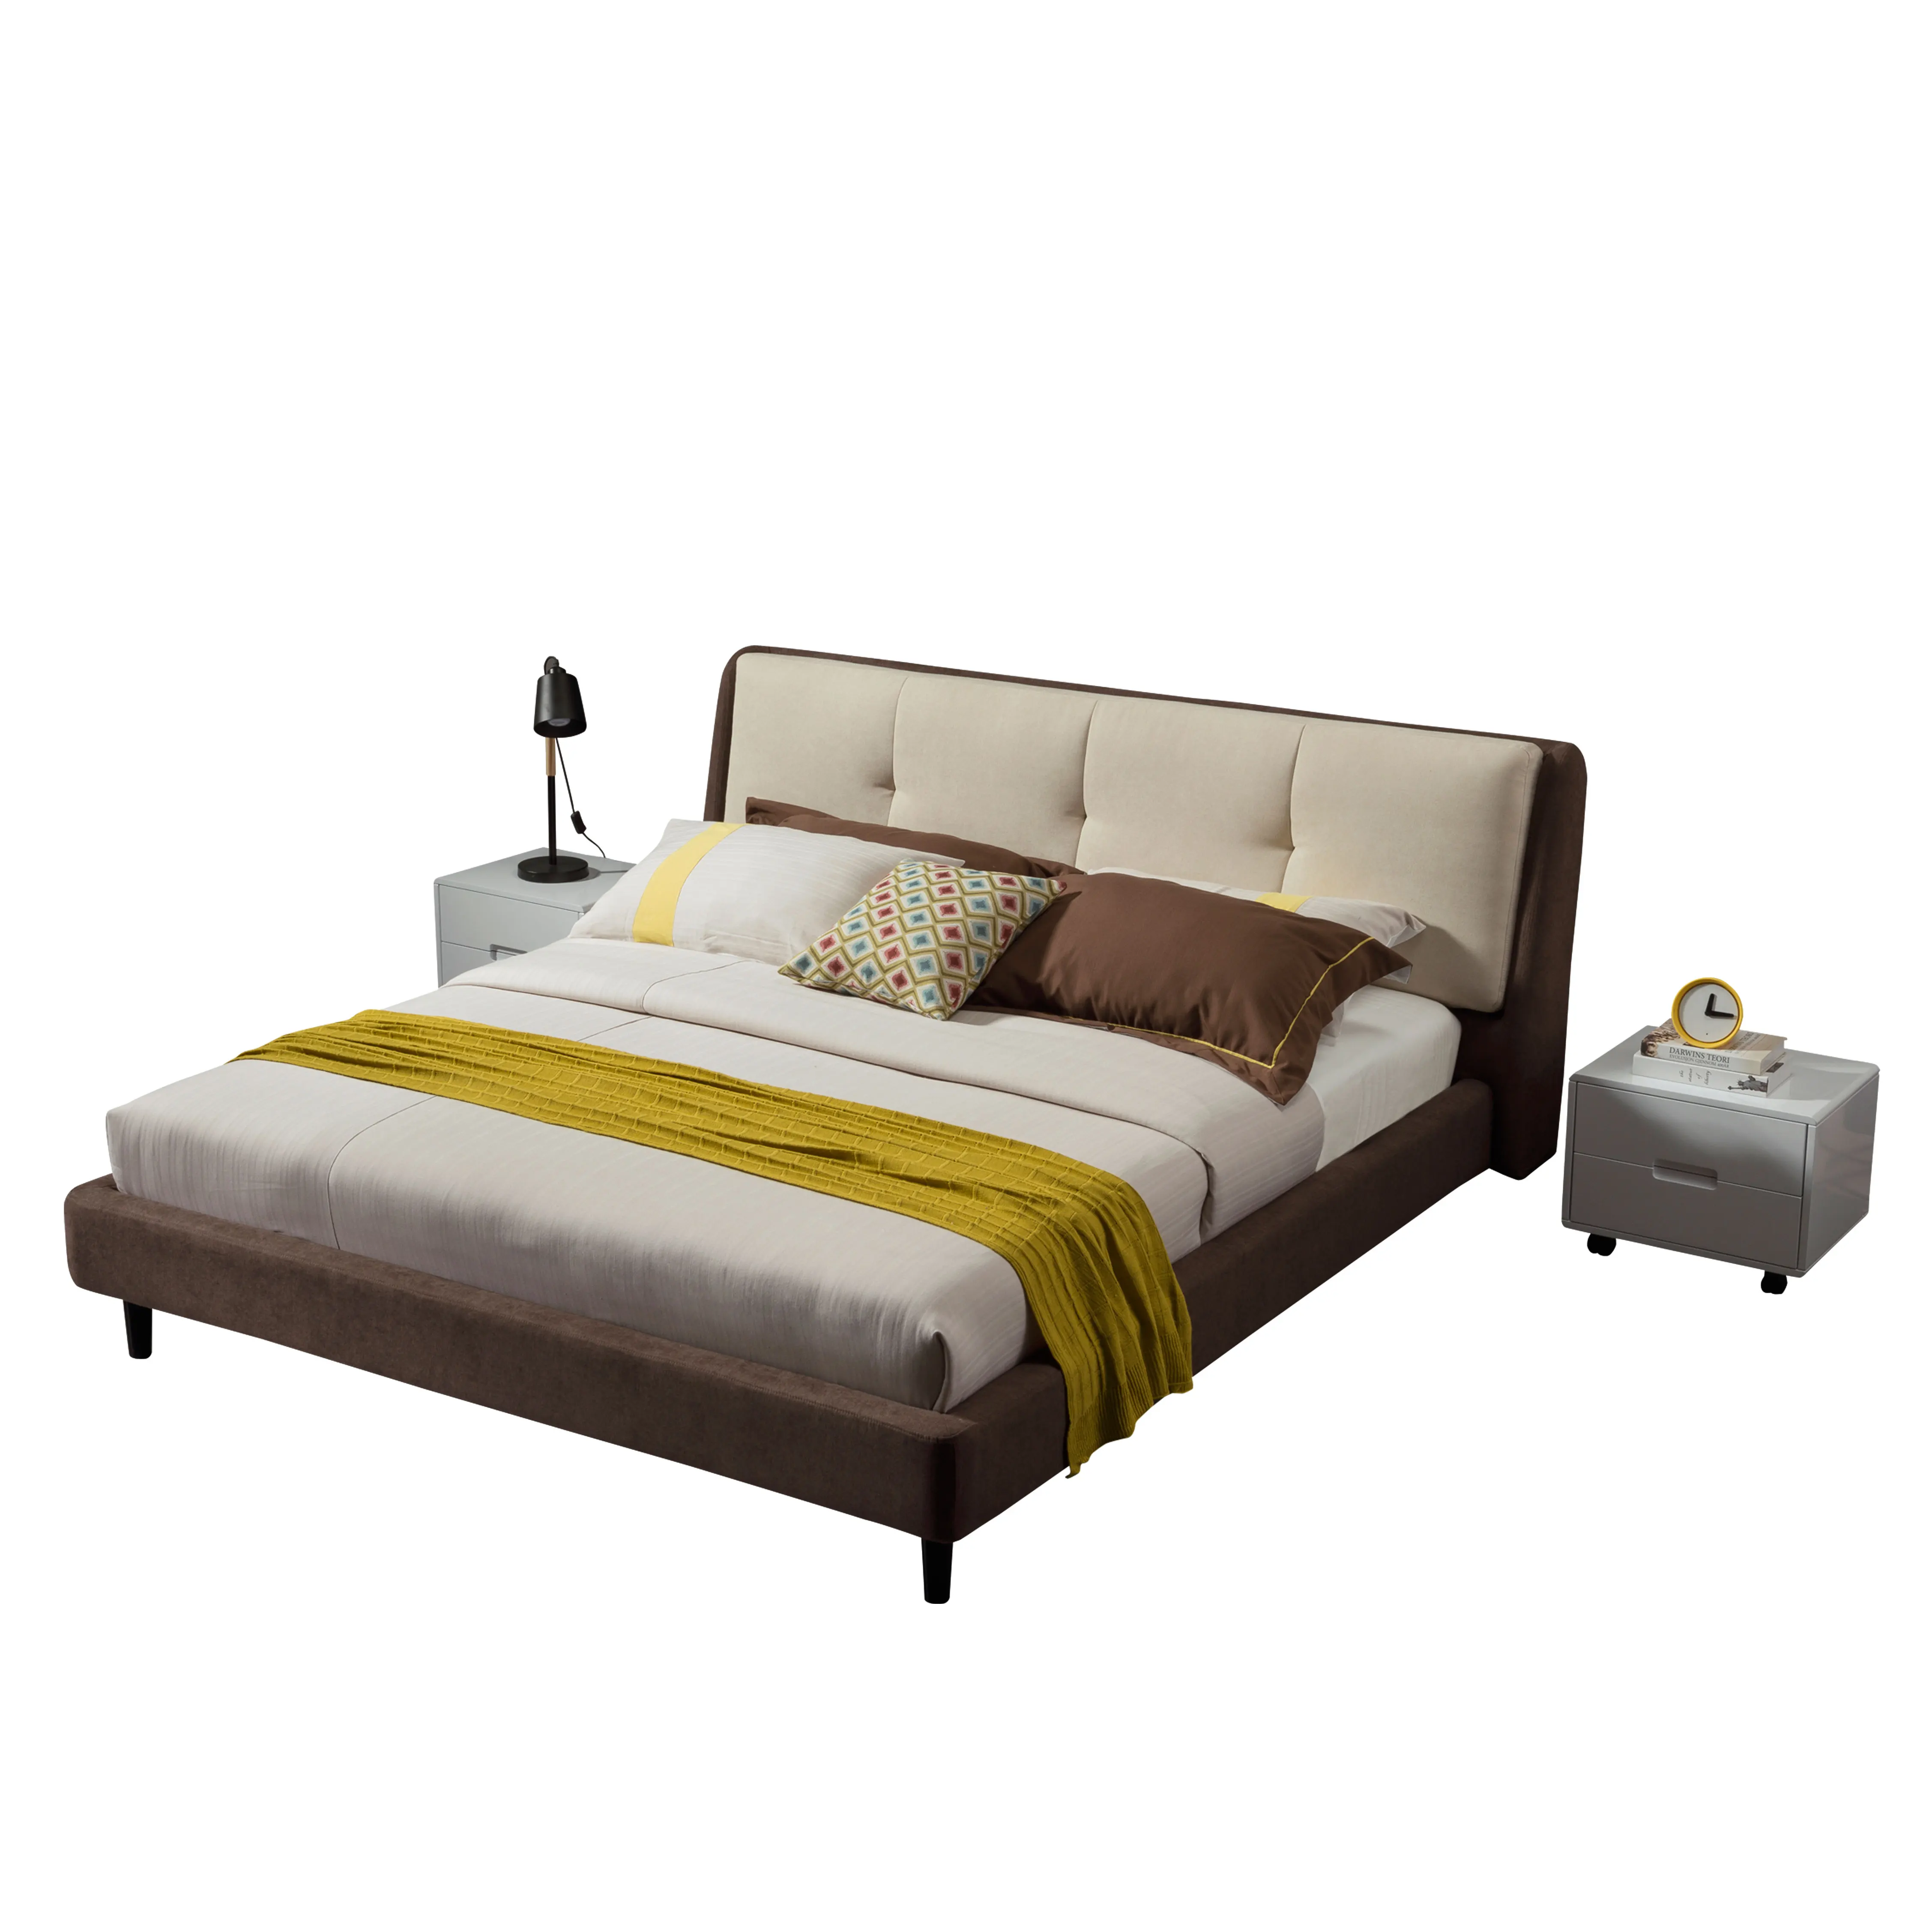 Custom simple design modern upholstery king size wooden twin bed for sale